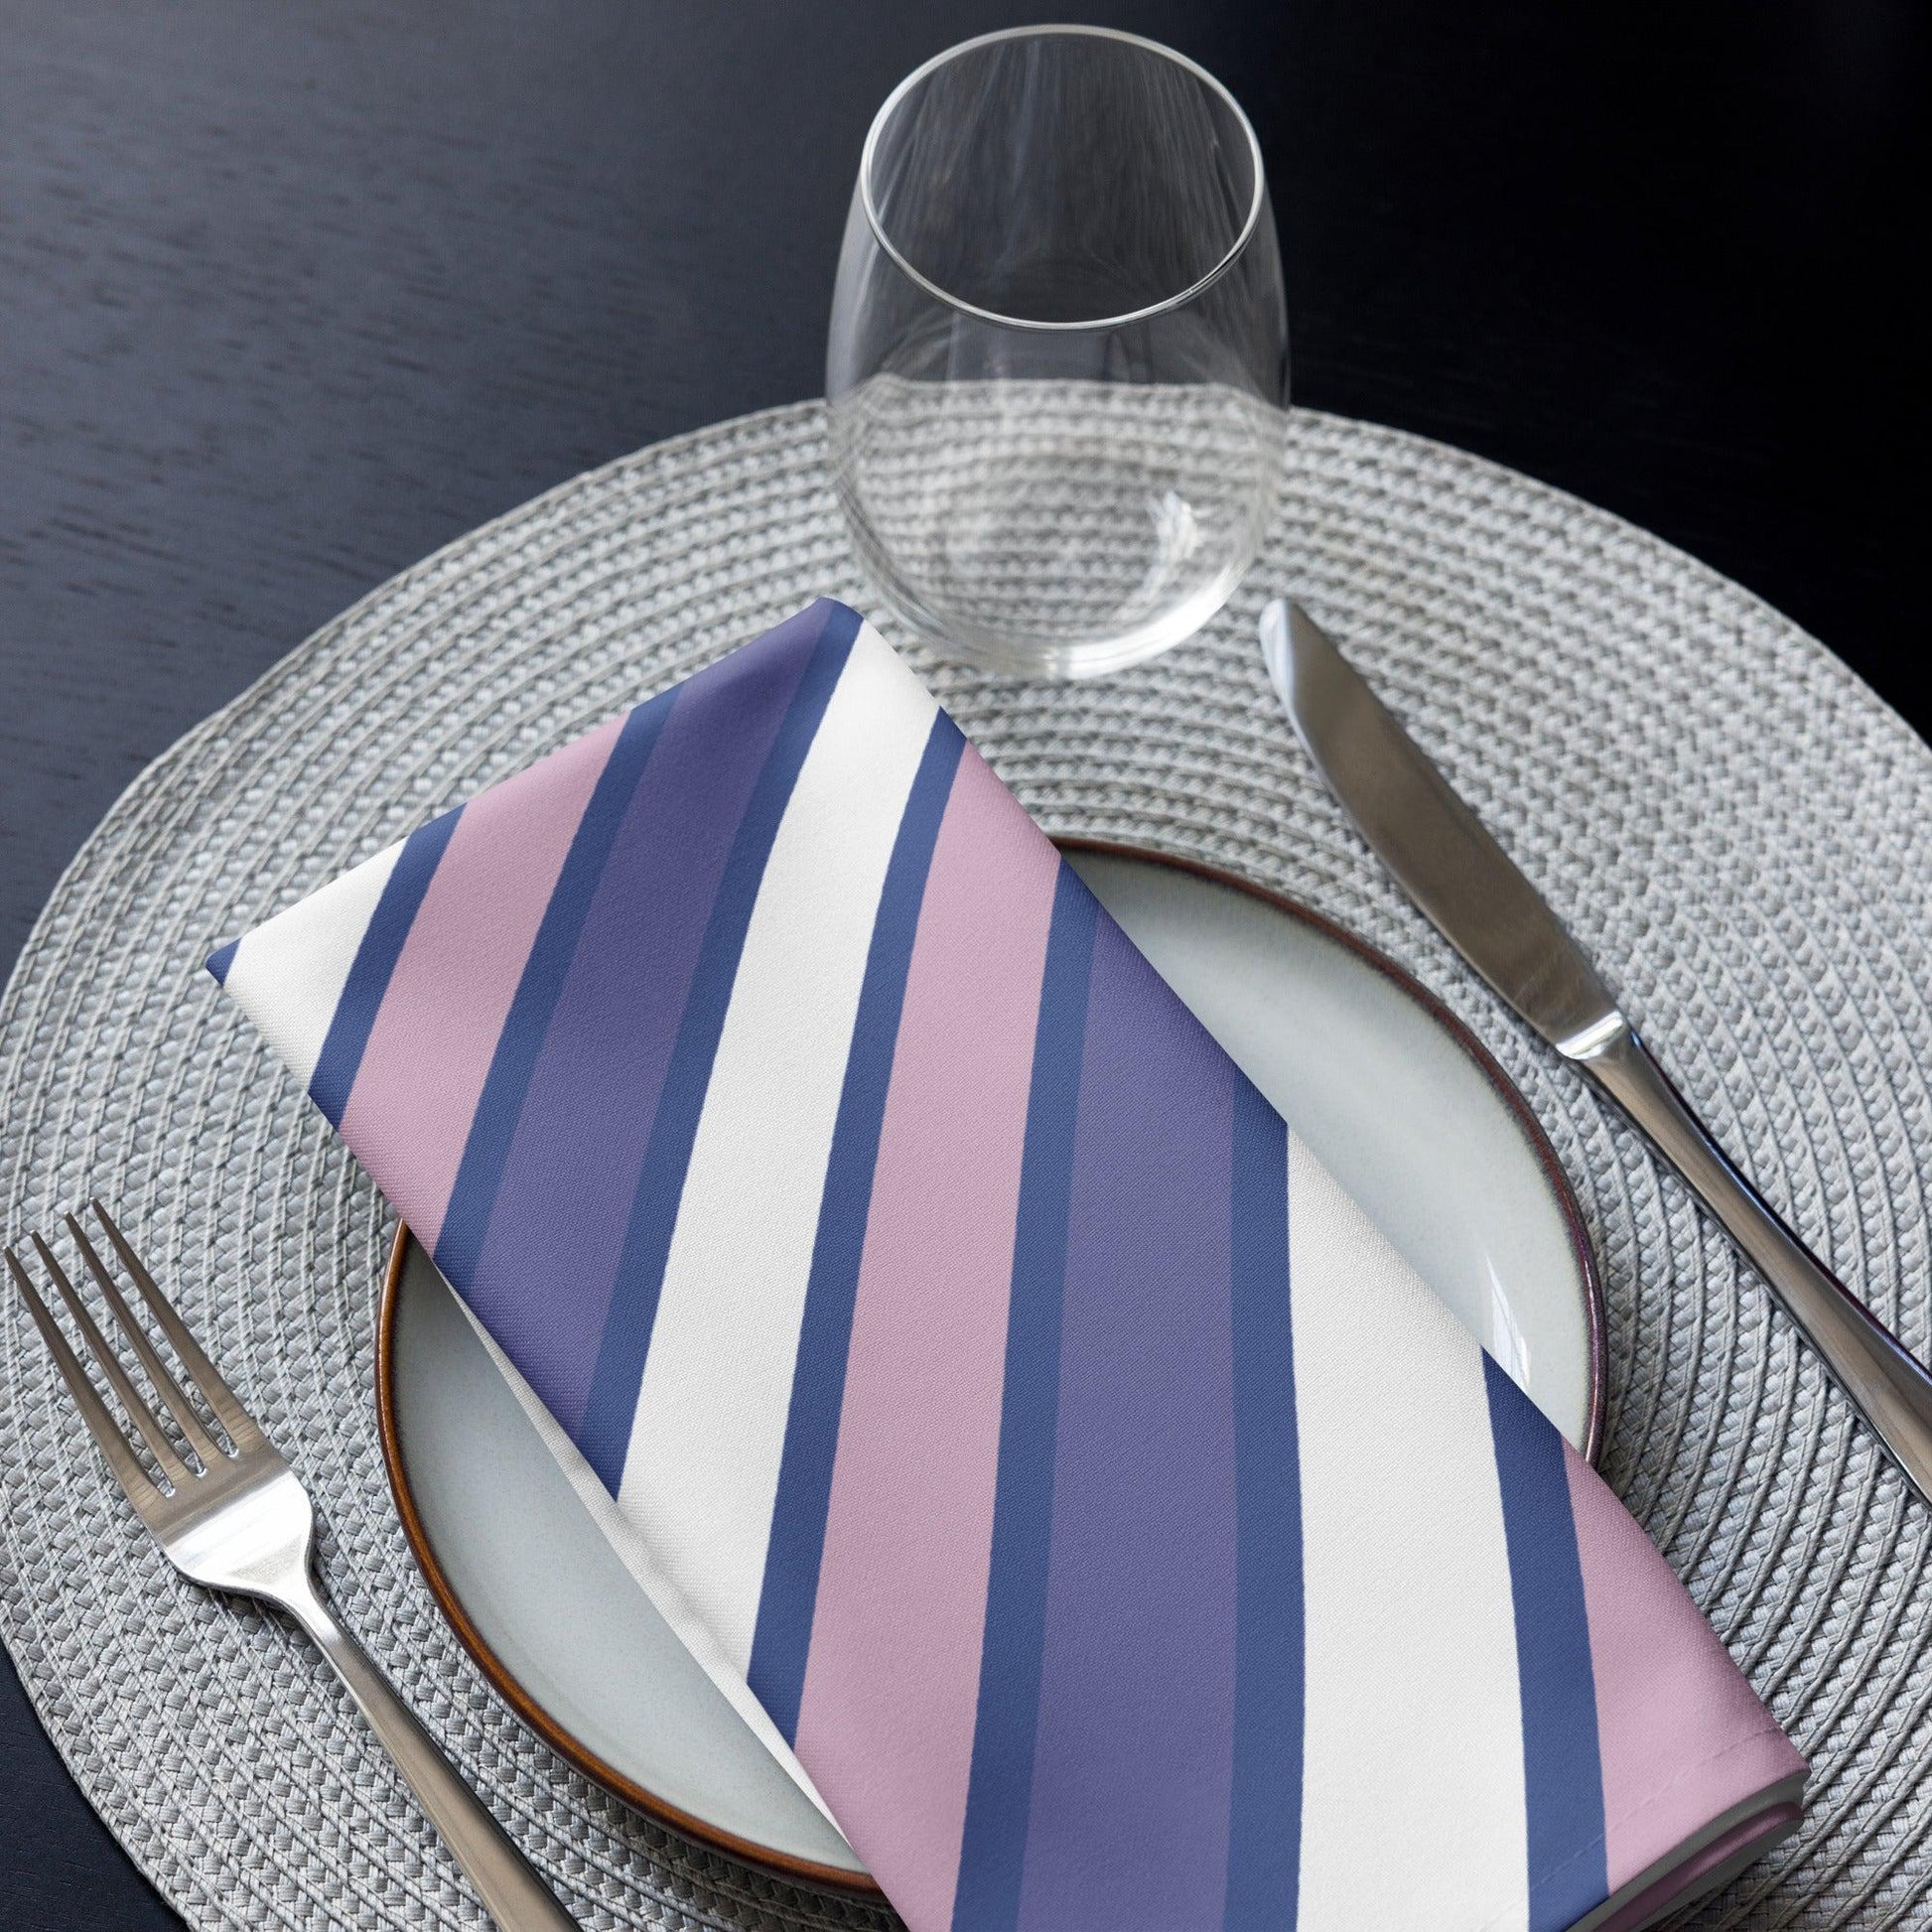 Elegant Swirls: Purple Cloth Napkin Set – Add a Touch of Sophistication to Your Table Setting